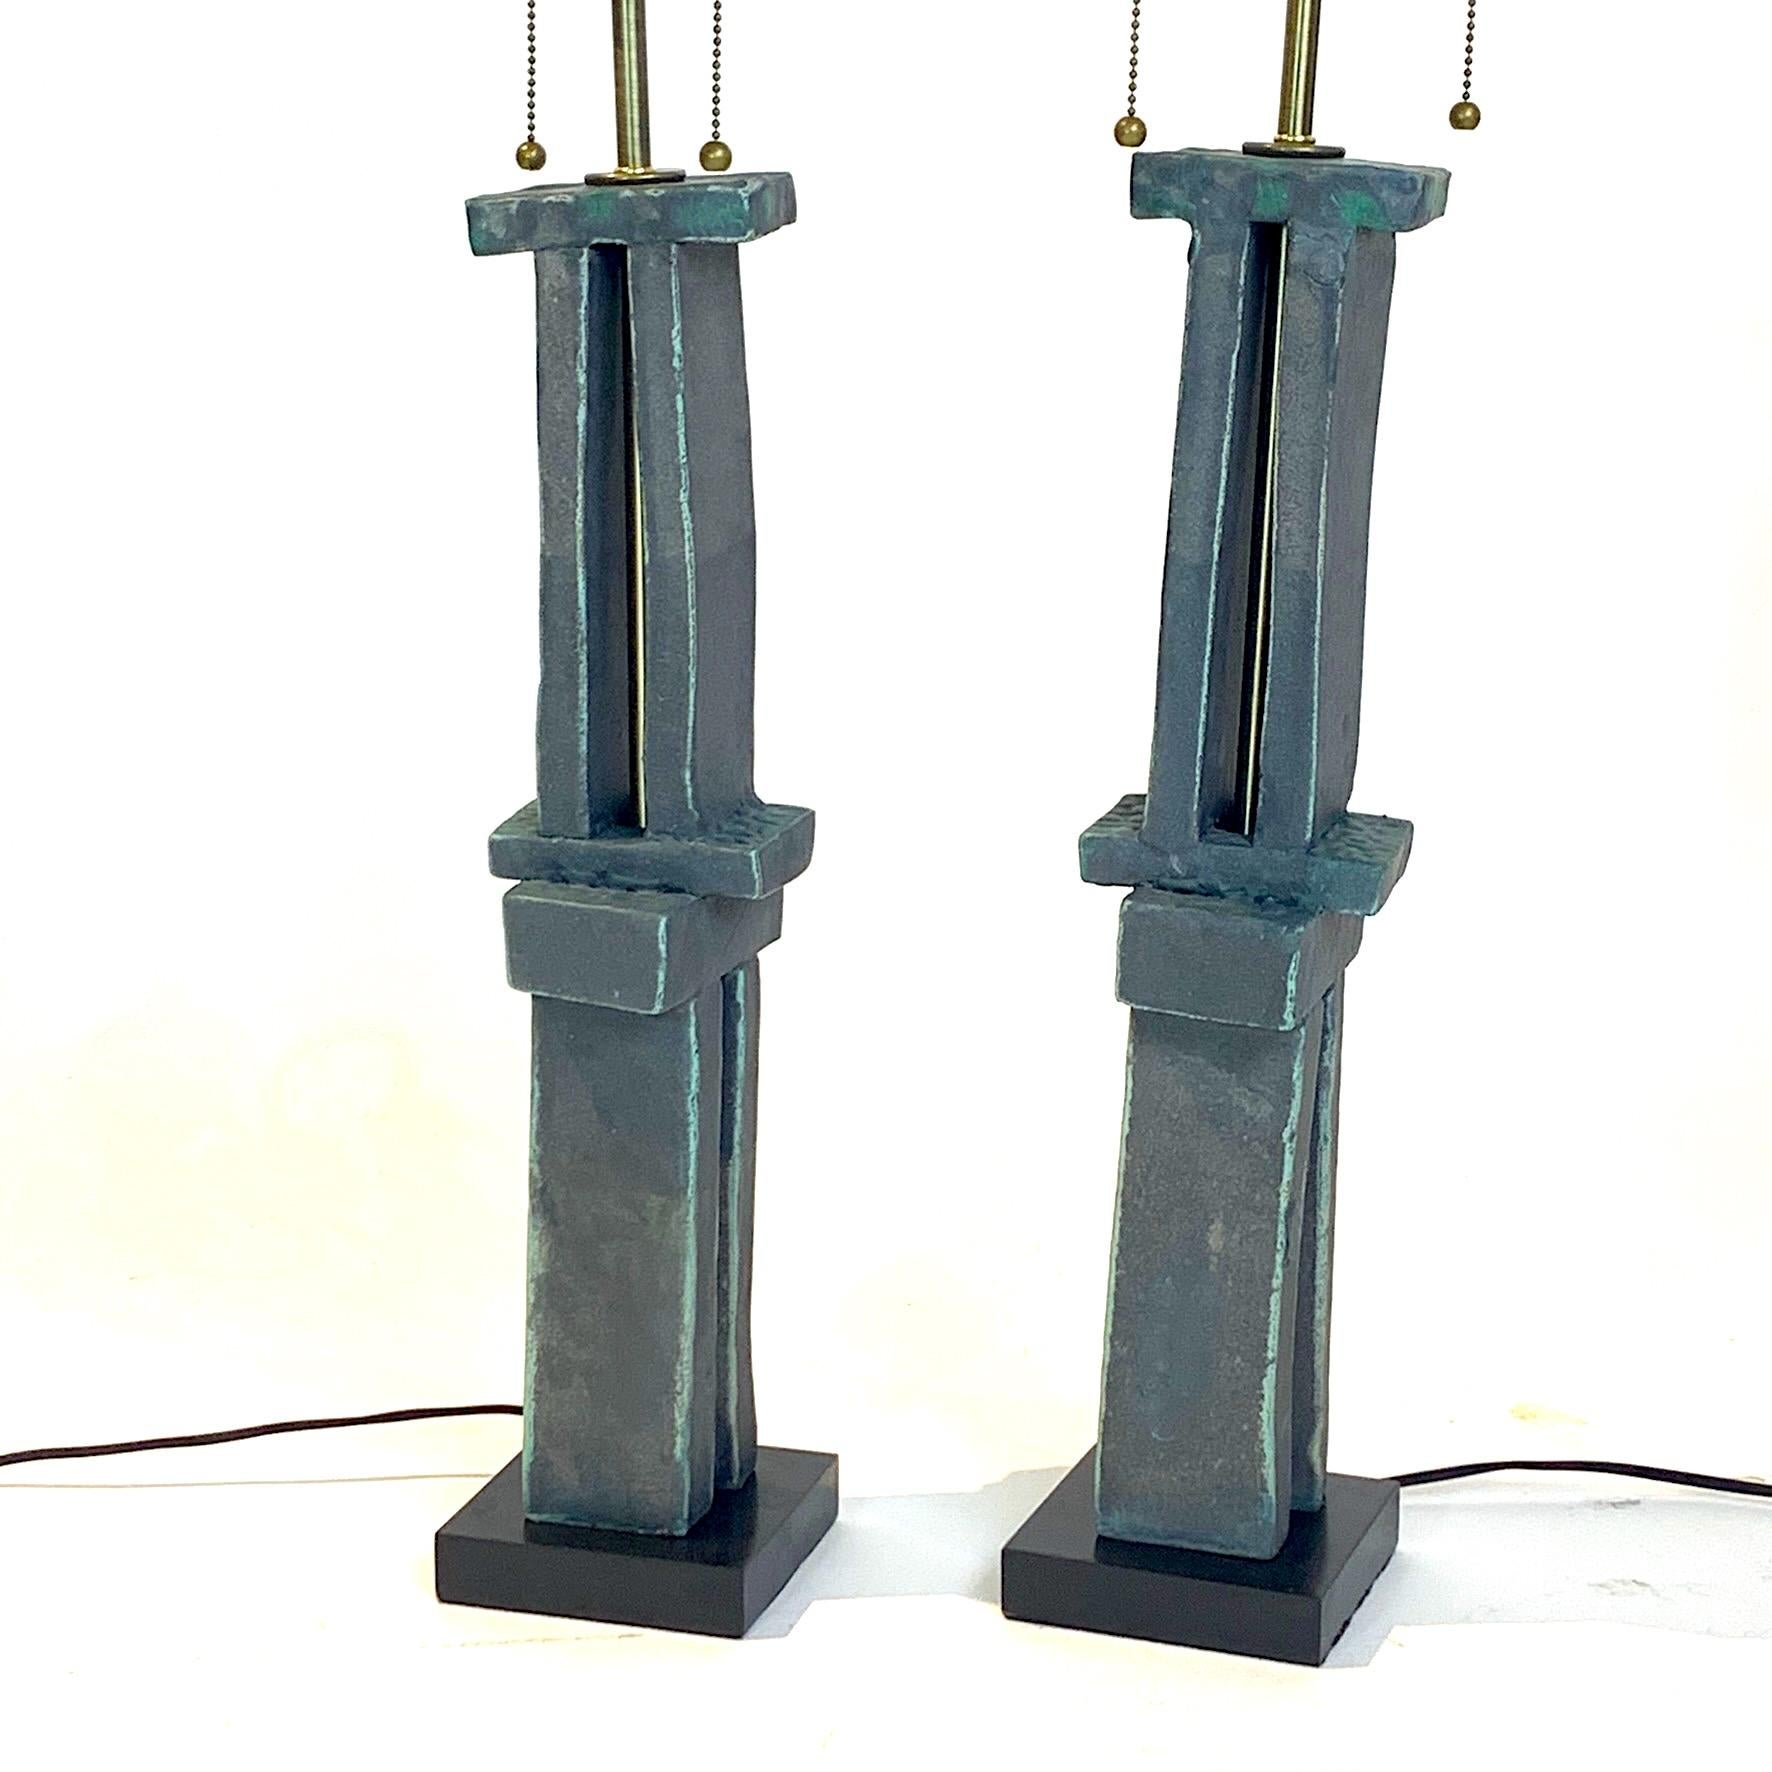 Amazing hand-built sculpture lamps created by Hudson, NY based artist Judy Engel. These stunning weathered bronze glazed totems have been finished with the best lighting hardware in brass with solid wood bases and cloth covered wiring. Absolutely